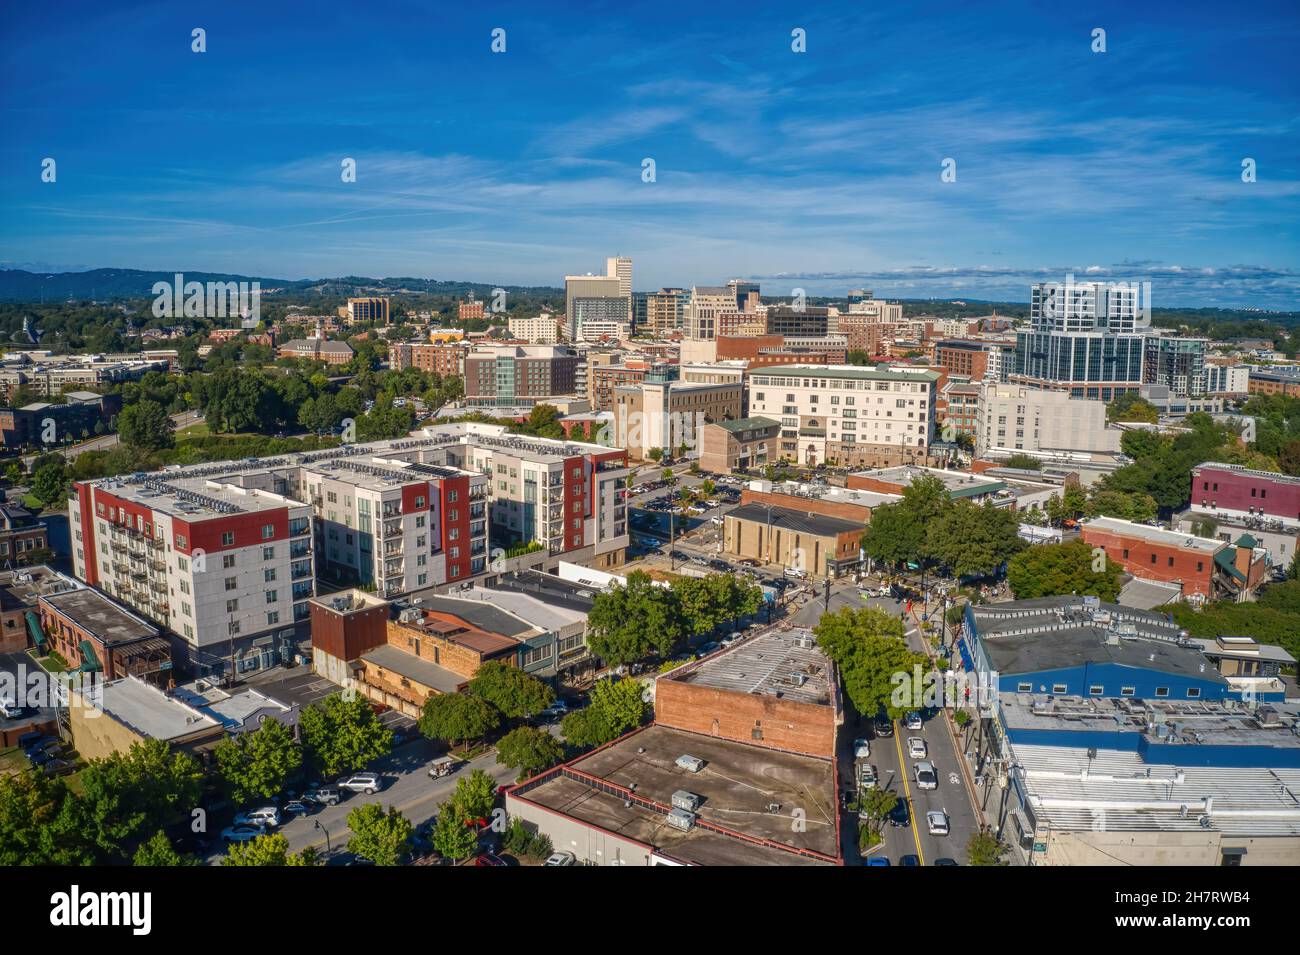 Aerial view of Greenville with dense buildings under a blue sky in South Carolina Stock Photo